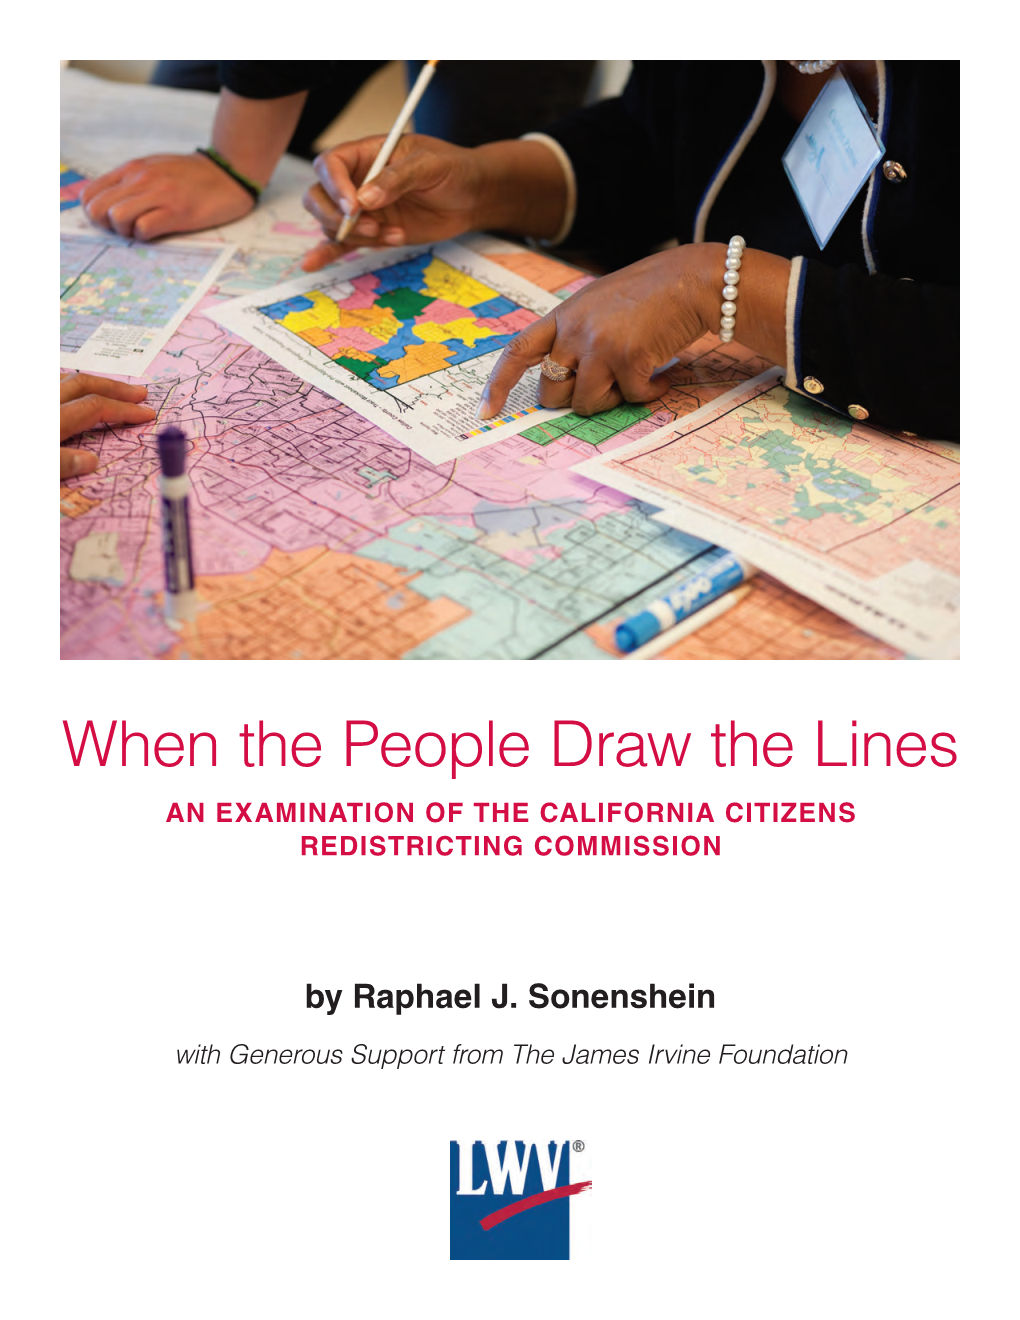 When the People Draw the Lines an Examination of the California Citizens Redistricting Commission